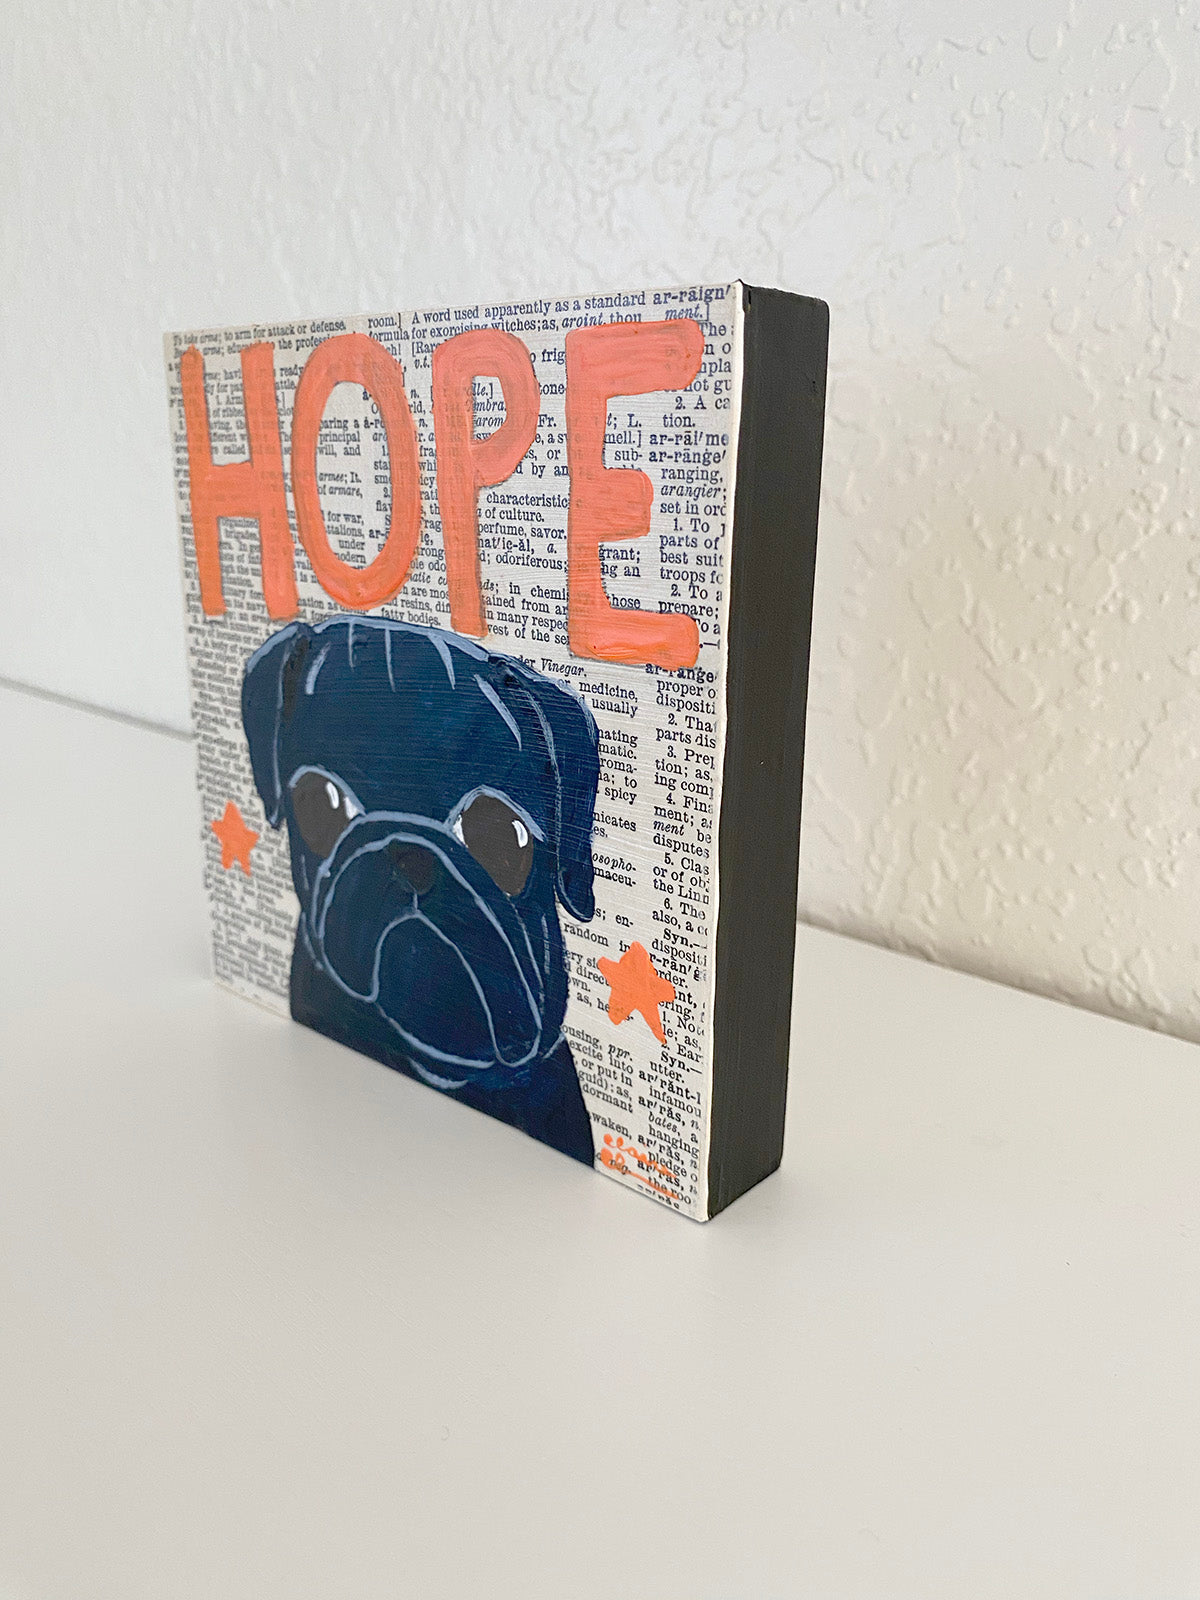 Hope - Original Word of the Year Painting